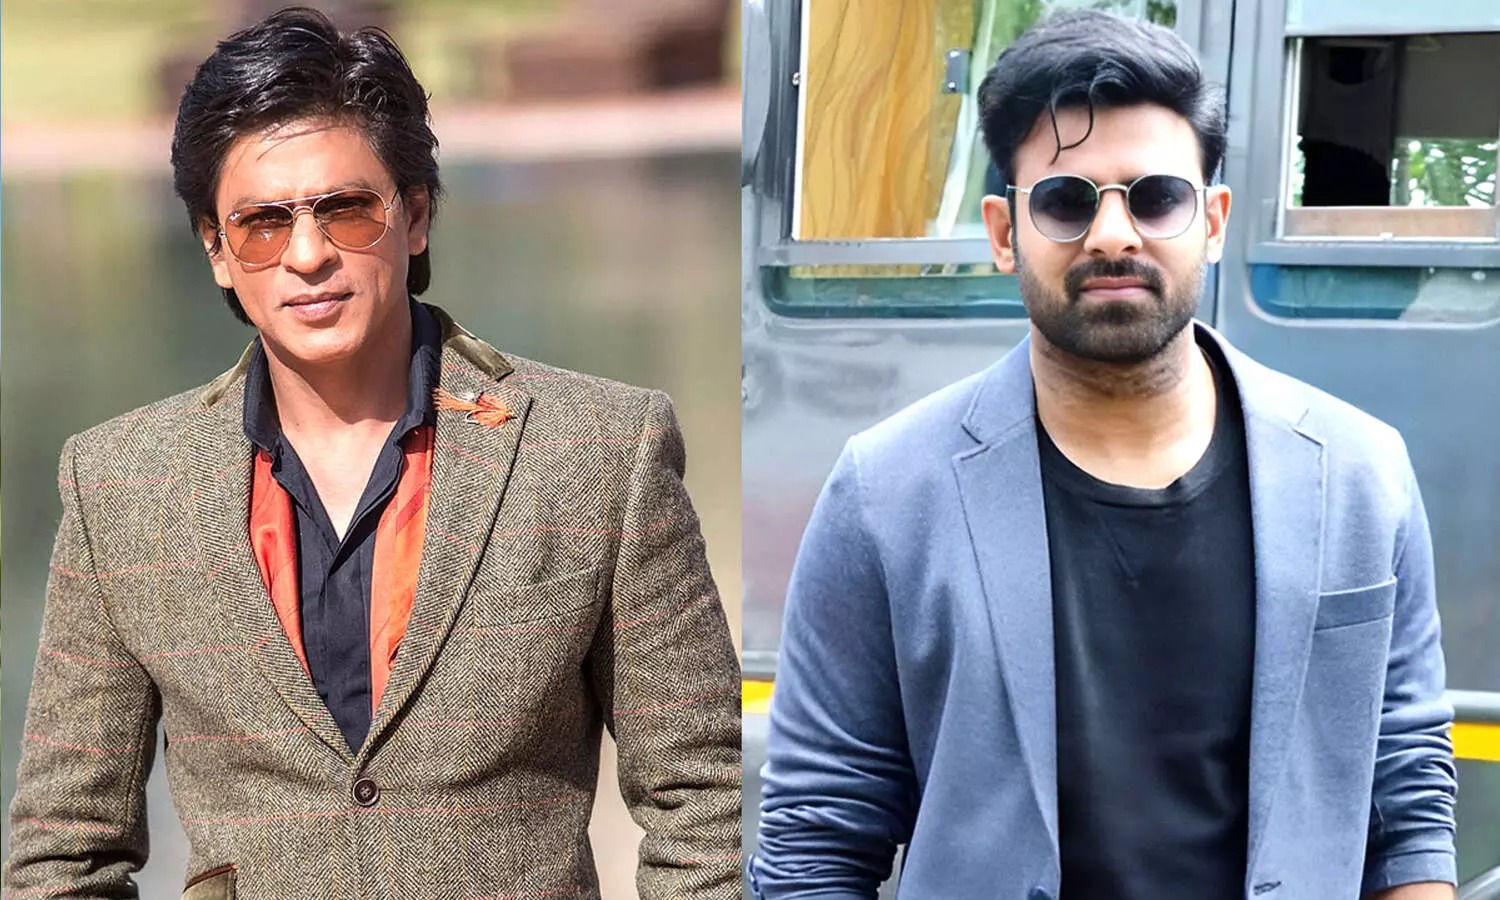 Prabhas Starrer Salaar Release Date Delayed Again, Now Set to Clash with Shah Rukh Khan's Dunki